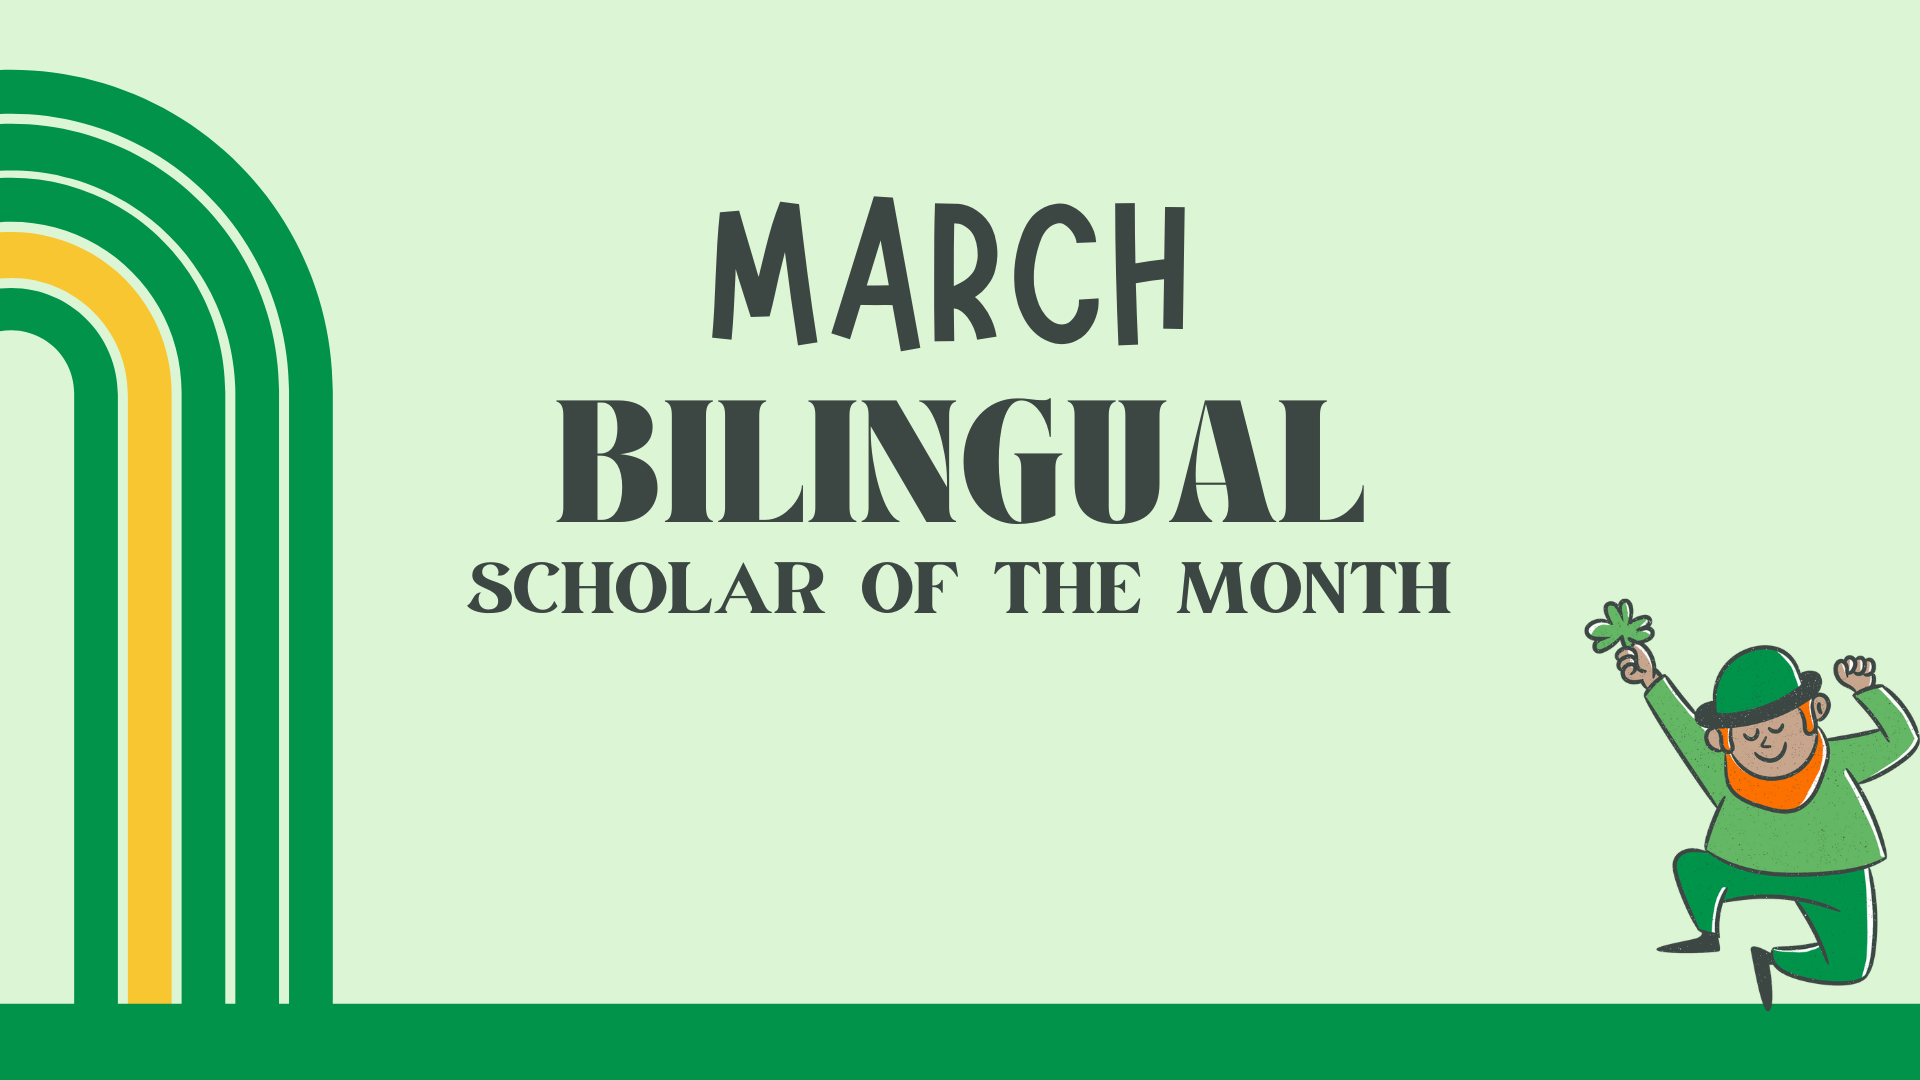 BILINGUAL OF THE MONTH